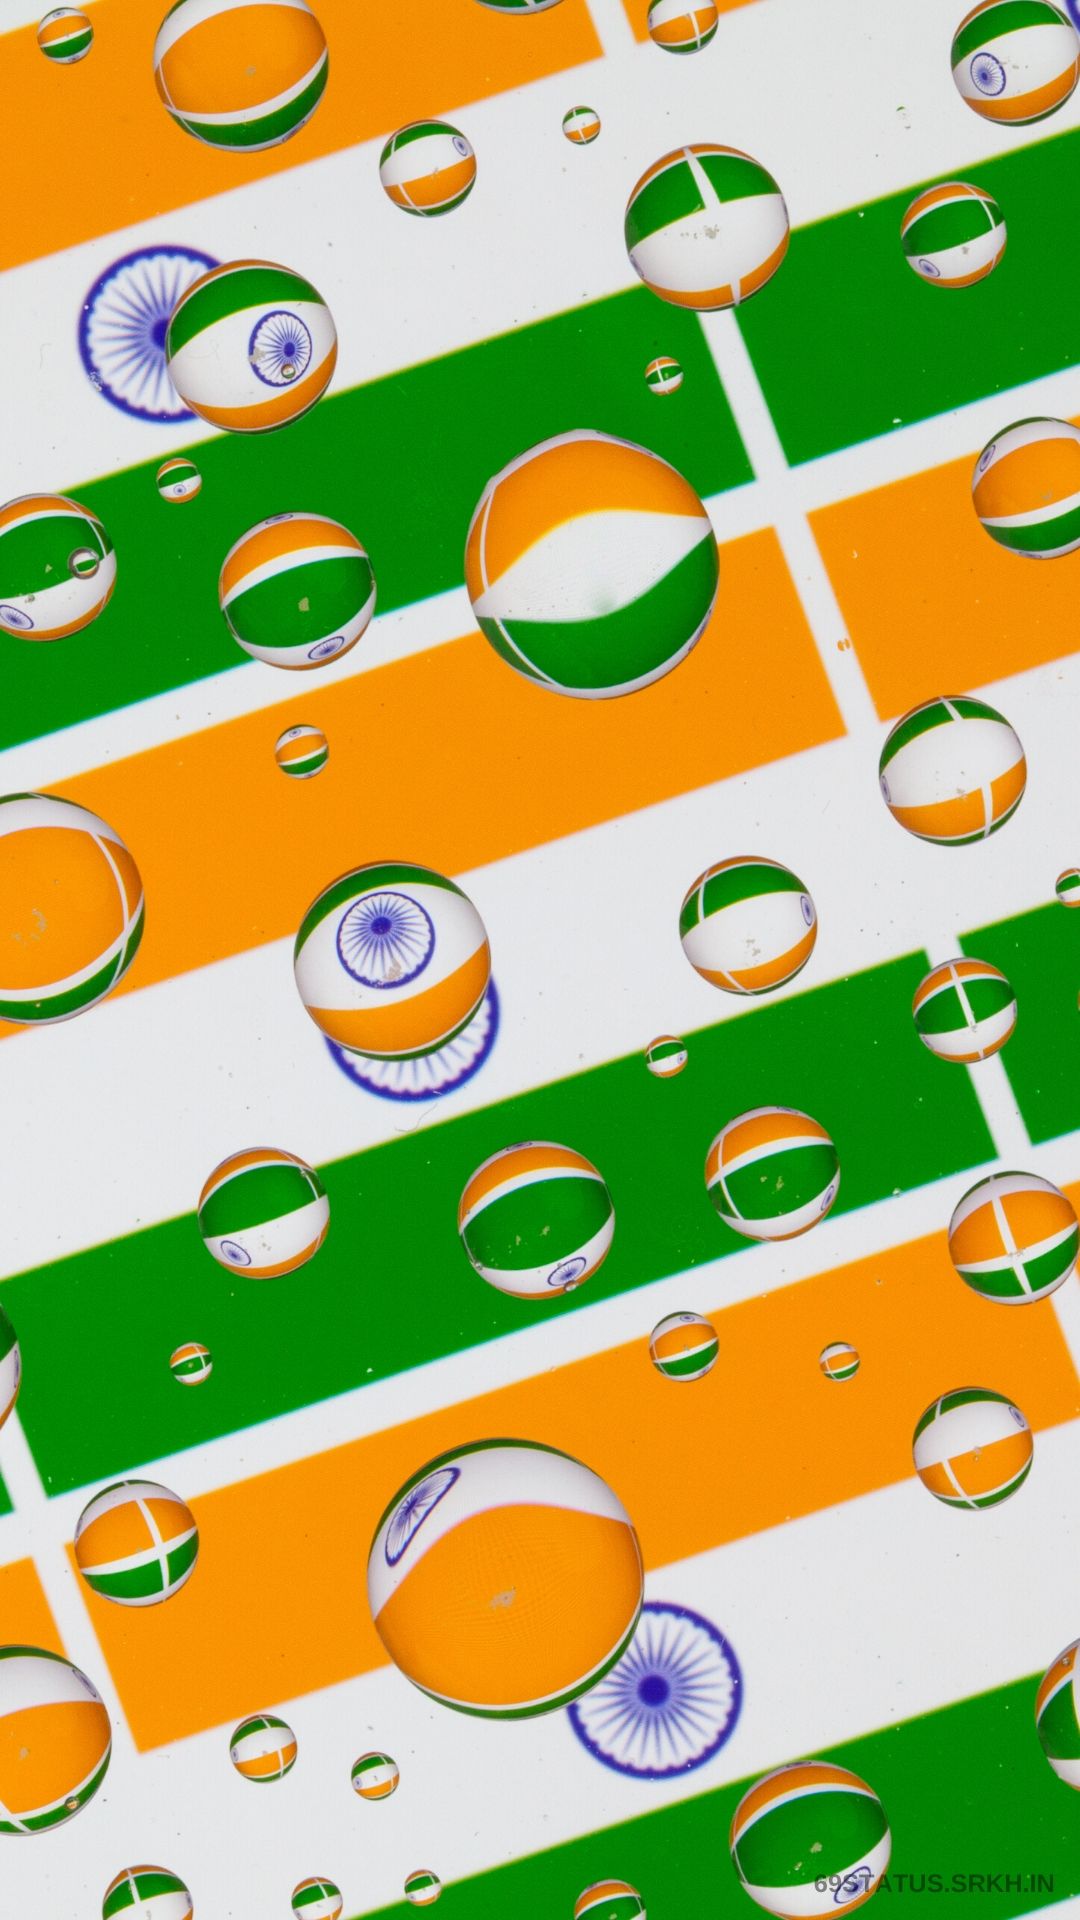 Independence Day Background Pics HD